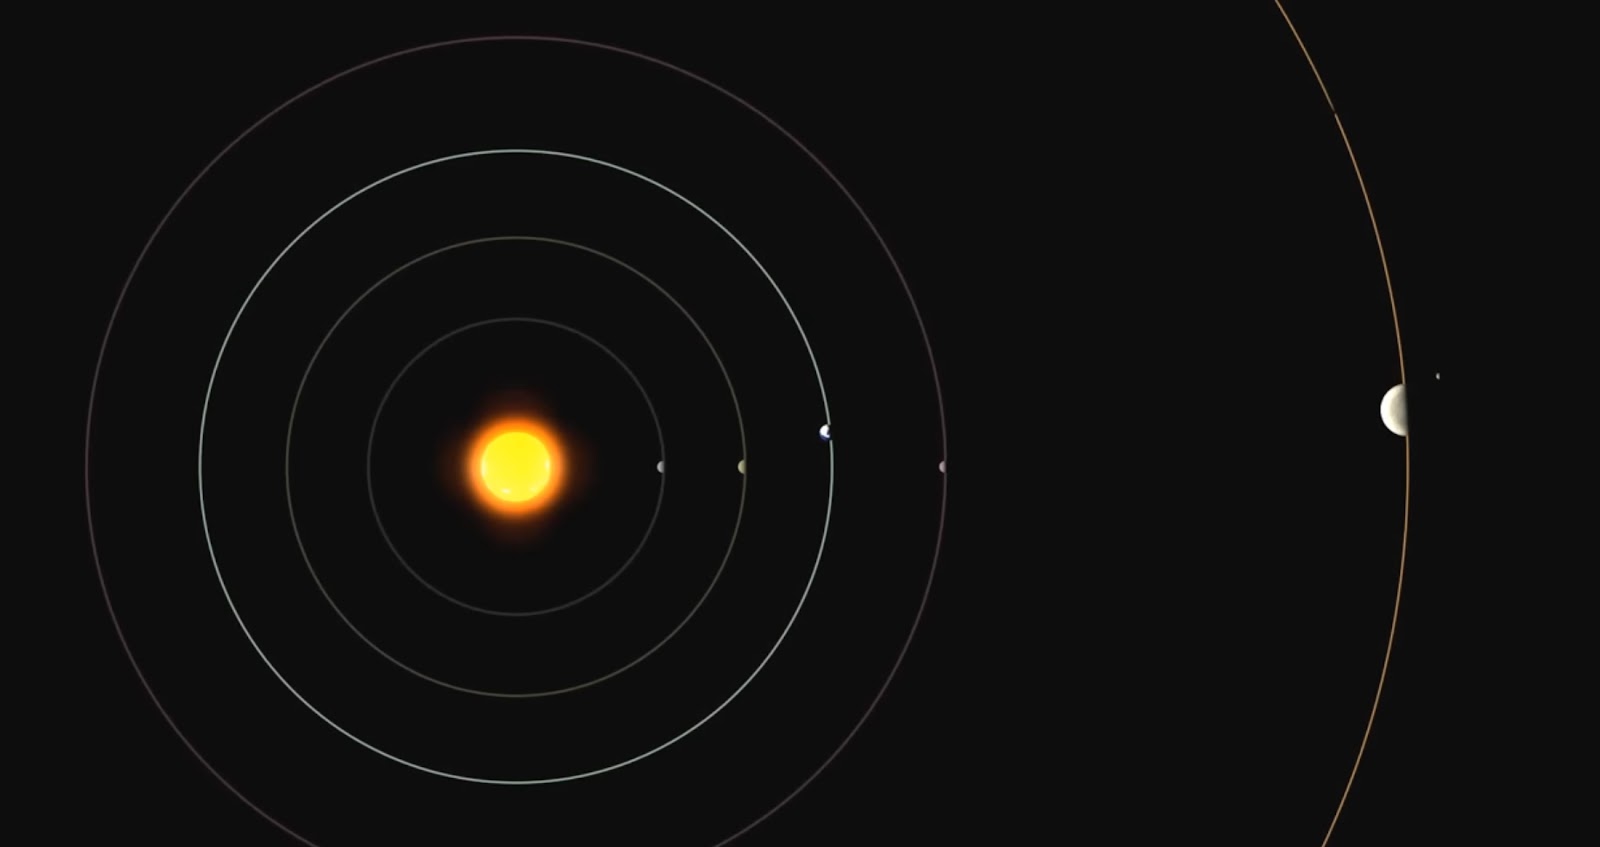 A solar system with a central sun, concentric orbital paths for planets, and a distant planet with a moon